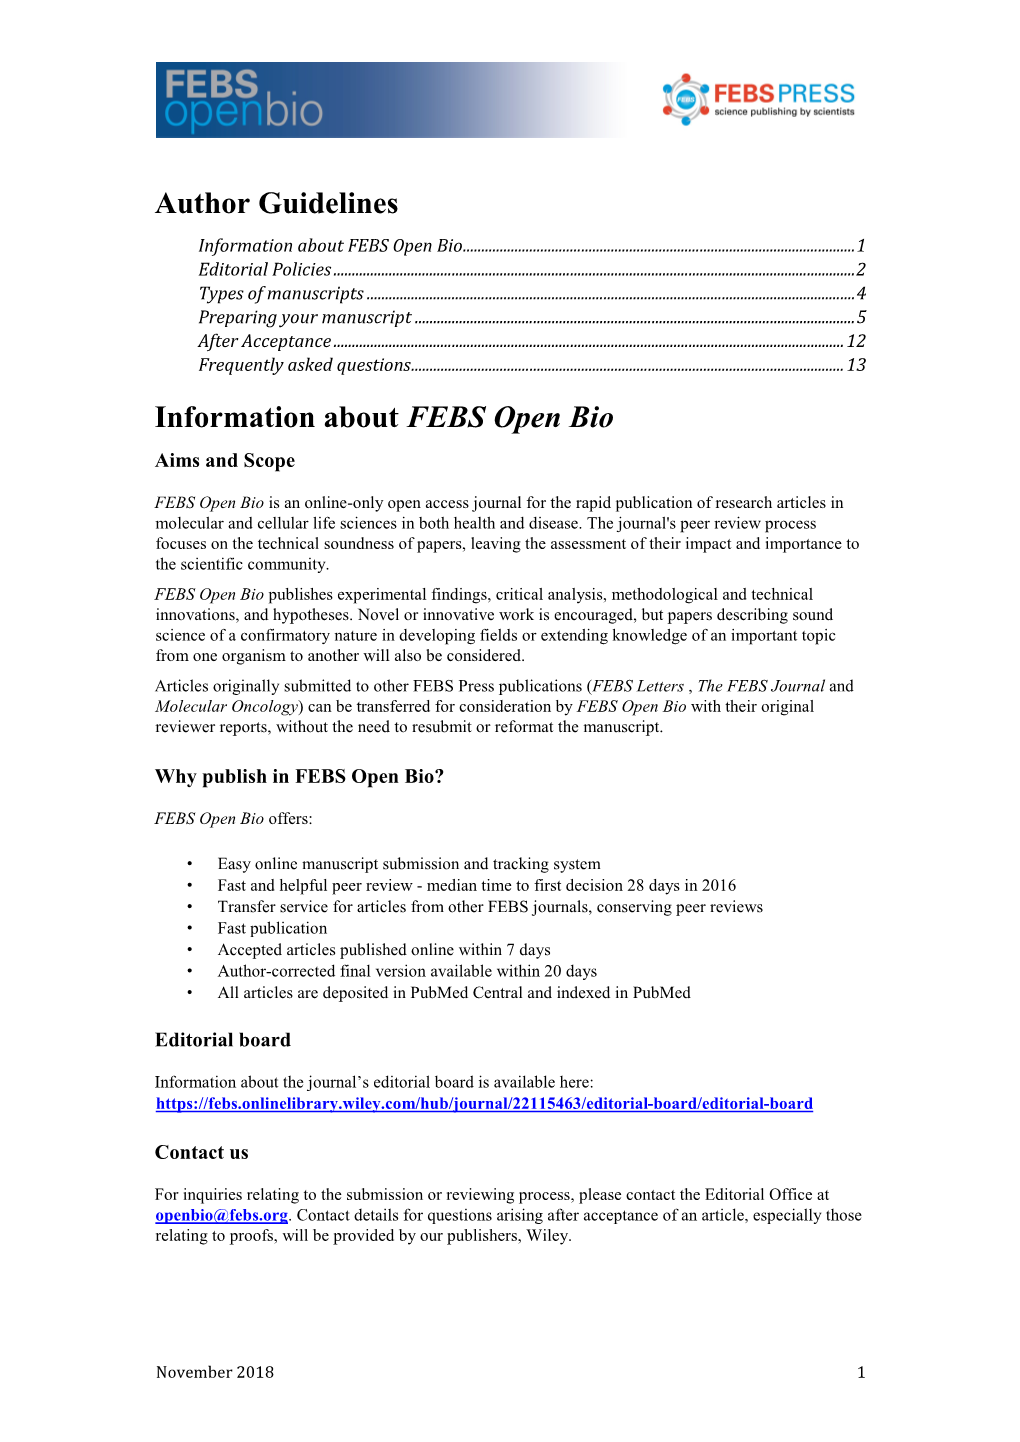 Author Guidelines Information About FEBS Open Bio